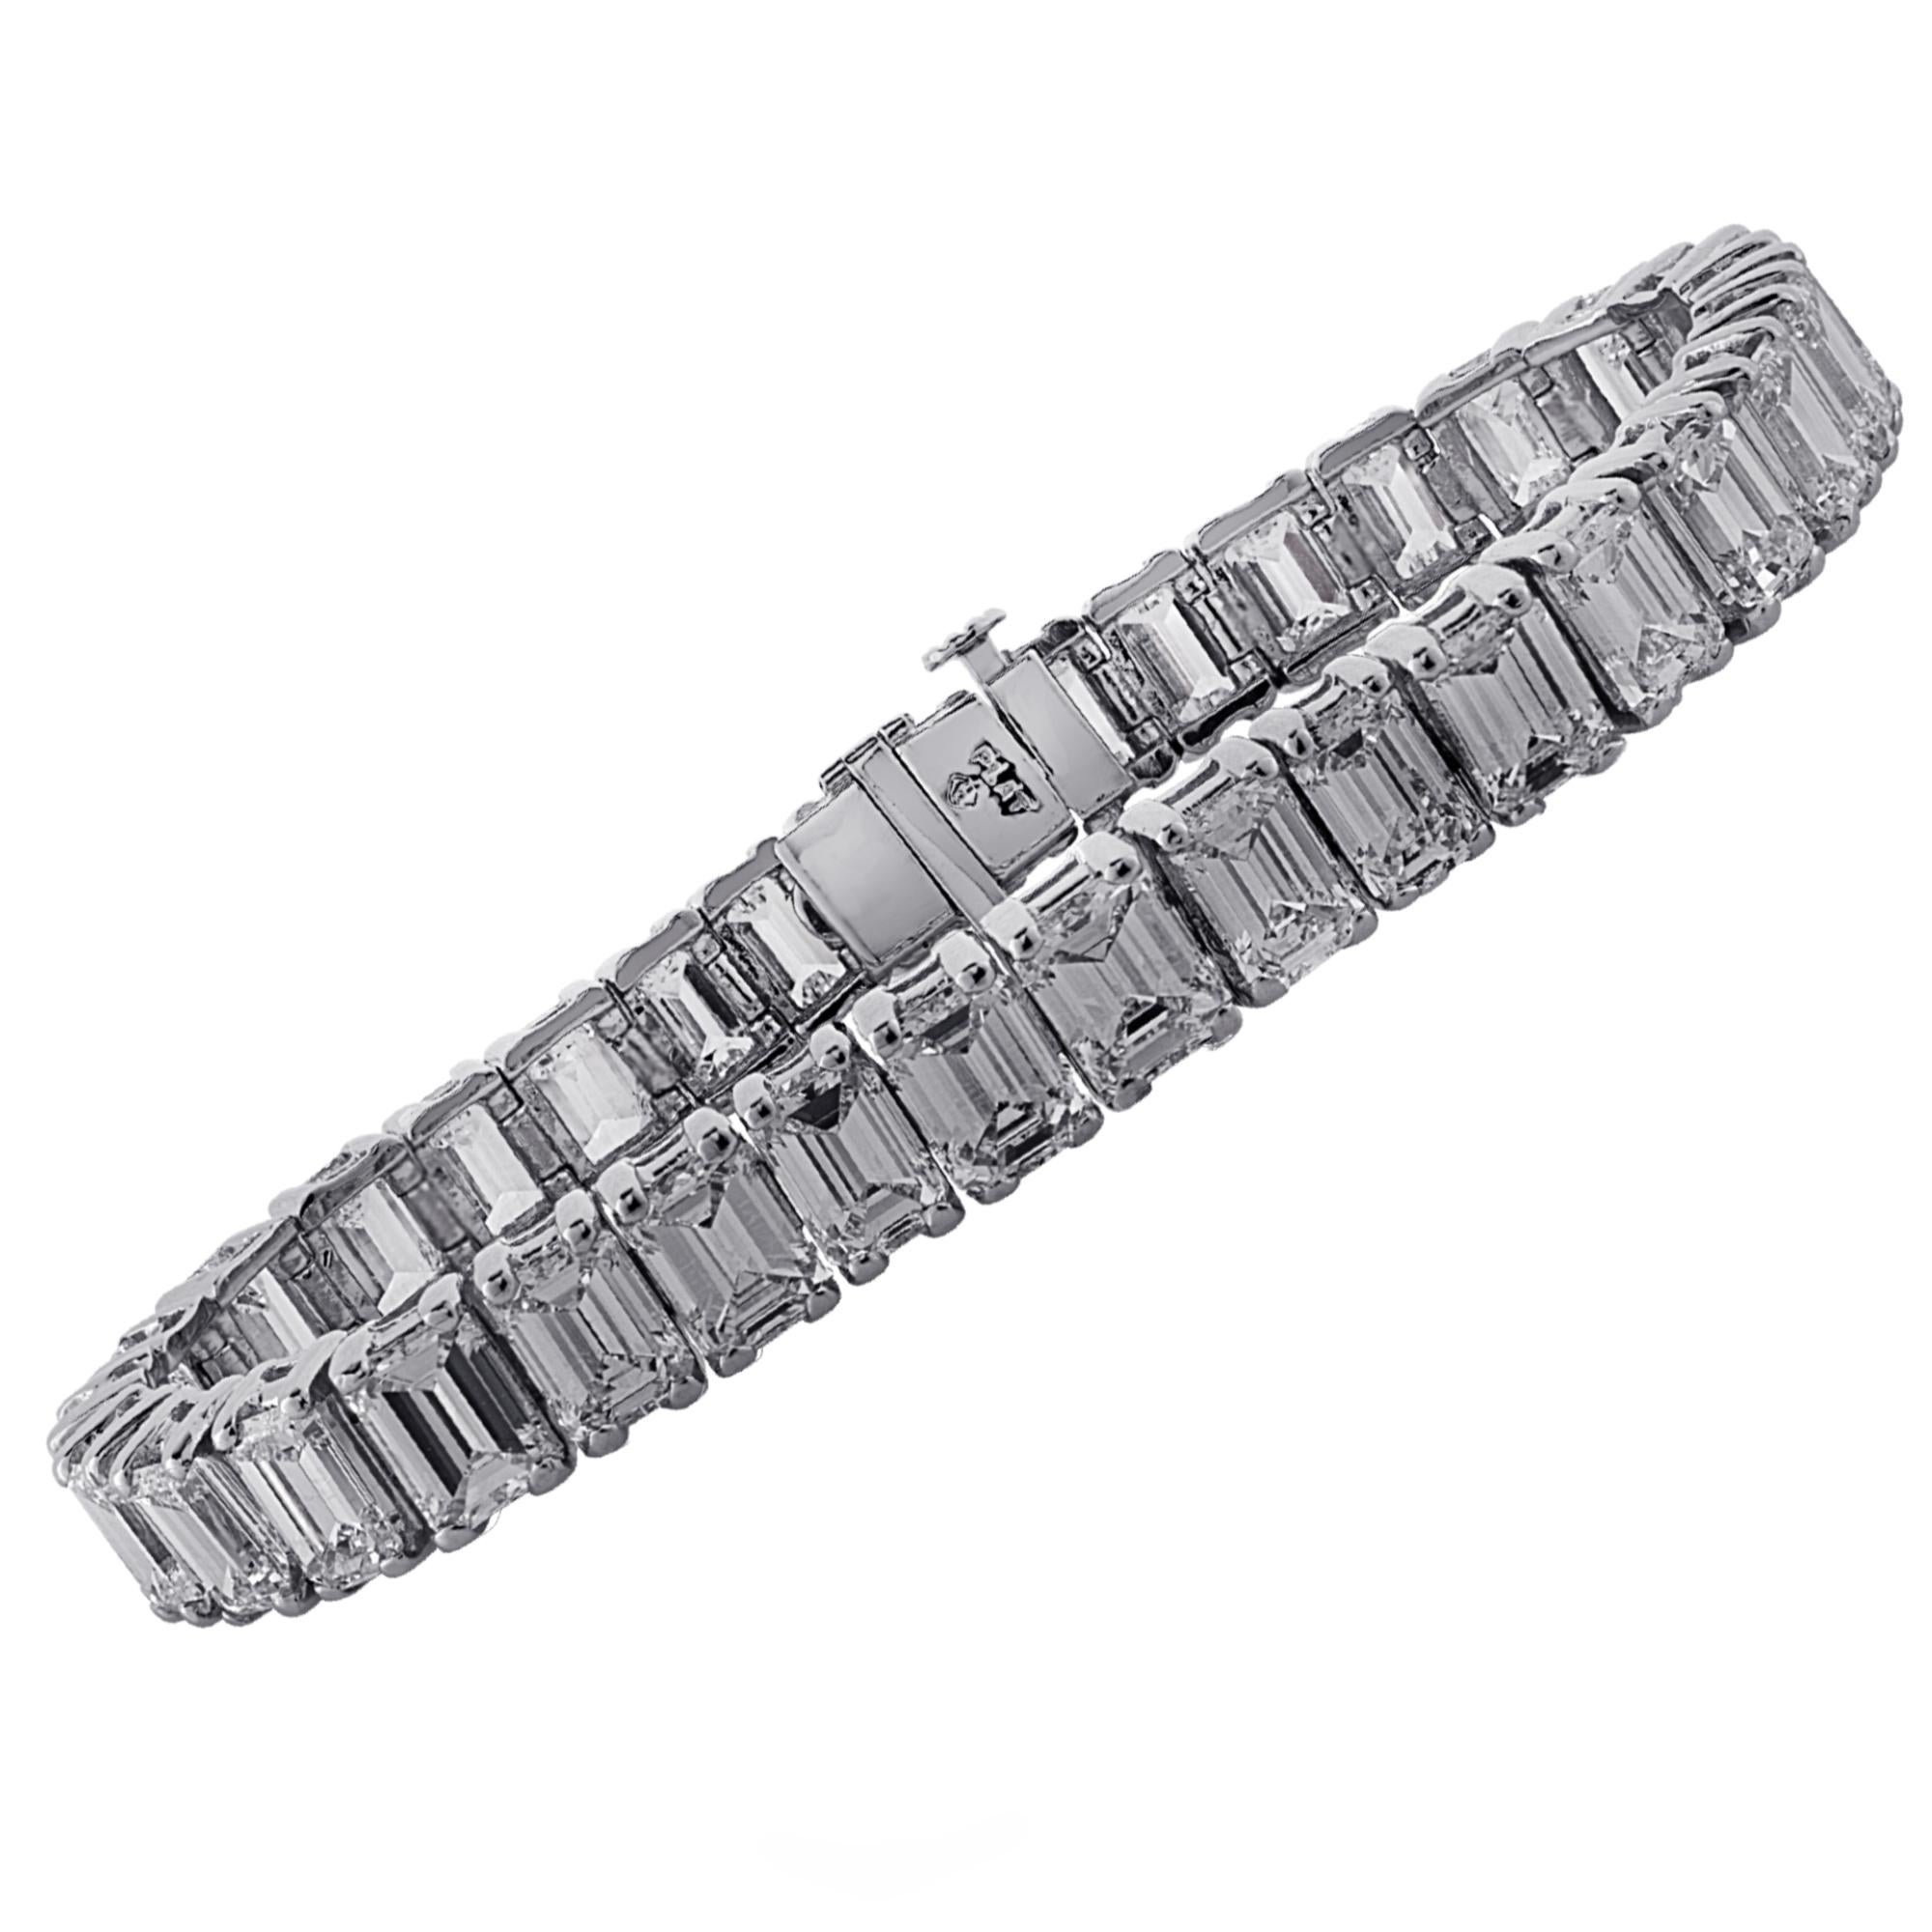 Exquisite diamond tennis bracelet crafted in platinum, showcasing 34 stunning emerald cut diamonds weighing approximately 35 carats total, I color, VS clarity, set in a seamless sea of eternity. This superb bracelet measures 8 mm in width and 6.75